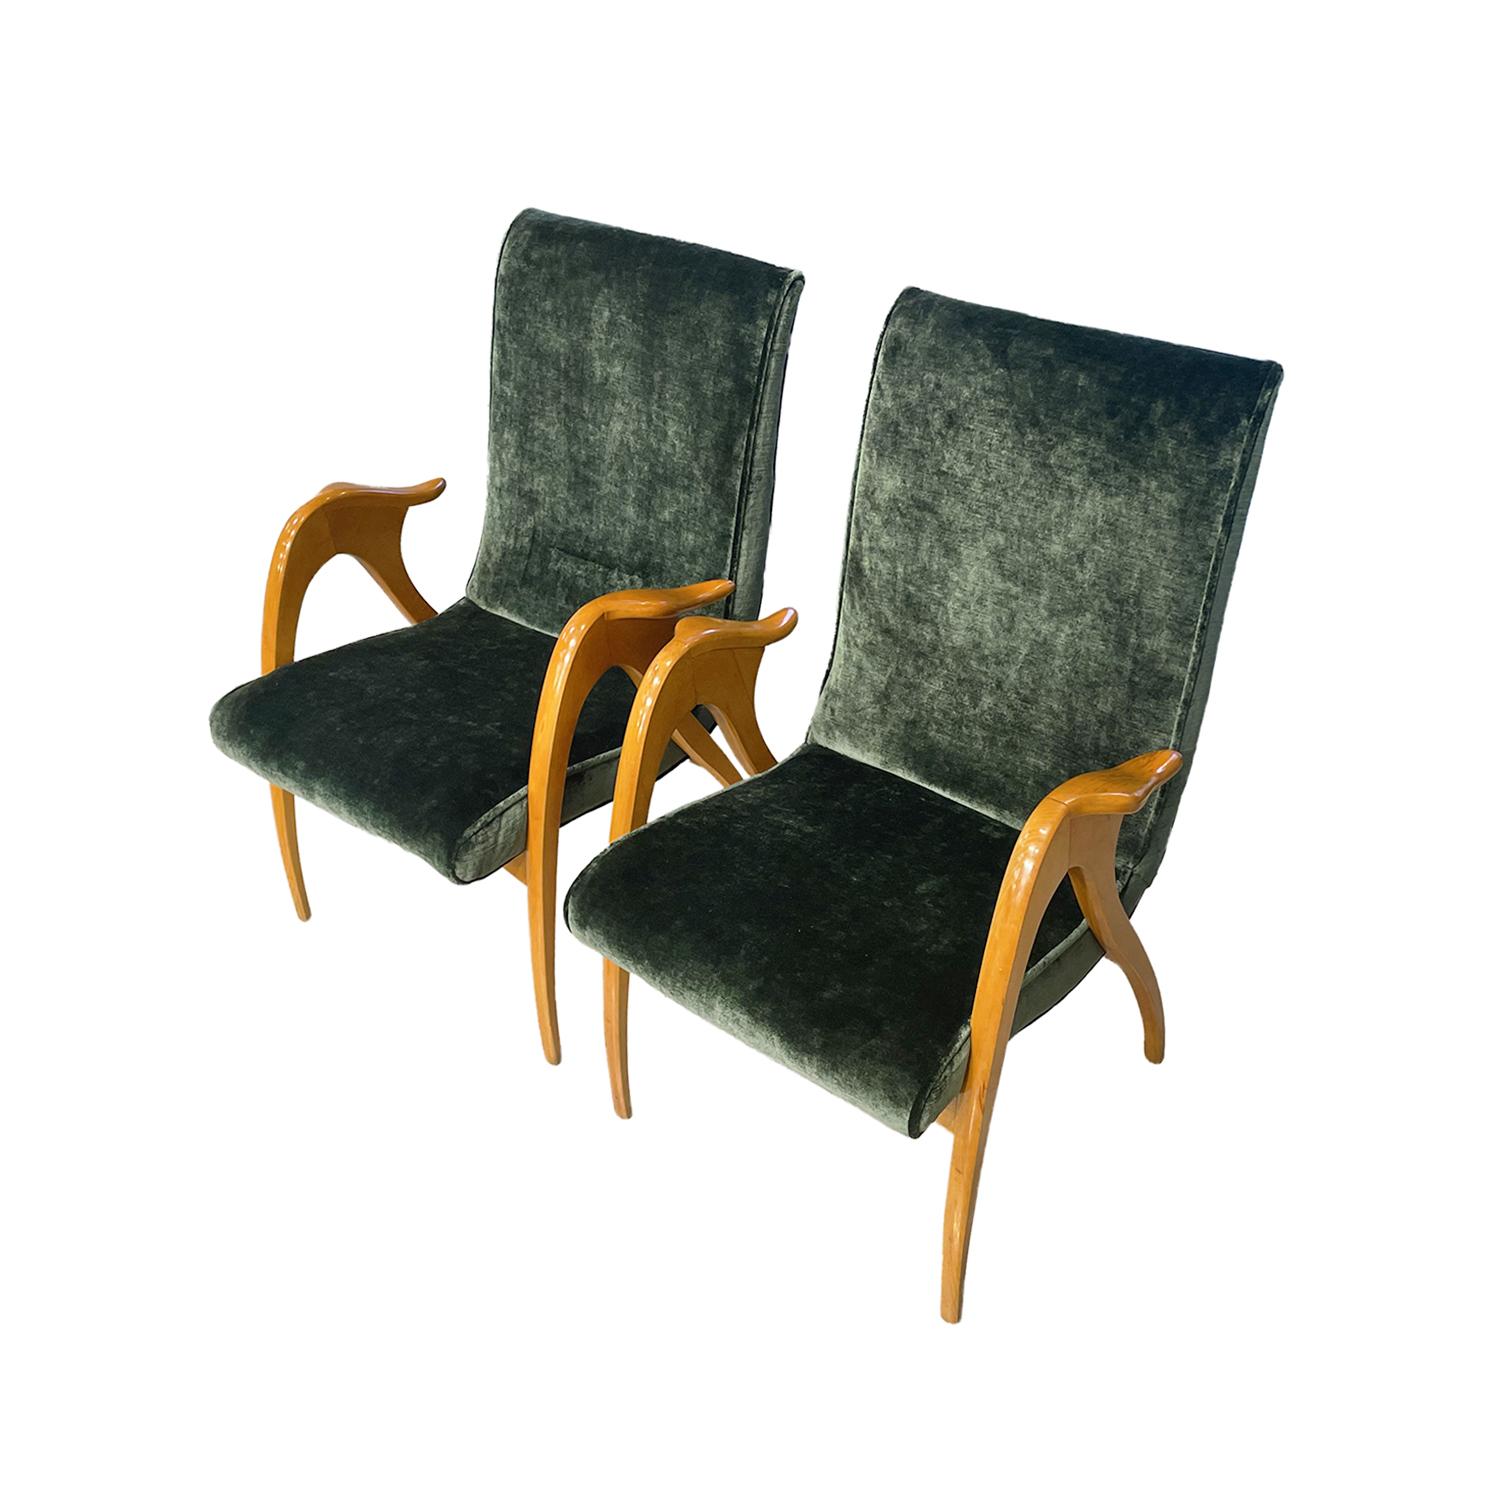 20th Century Green Italian Pair of Beechwood Lounge Chairs by Malatesta & Masson In Good Condition For Sale In West Palm Beach, FL